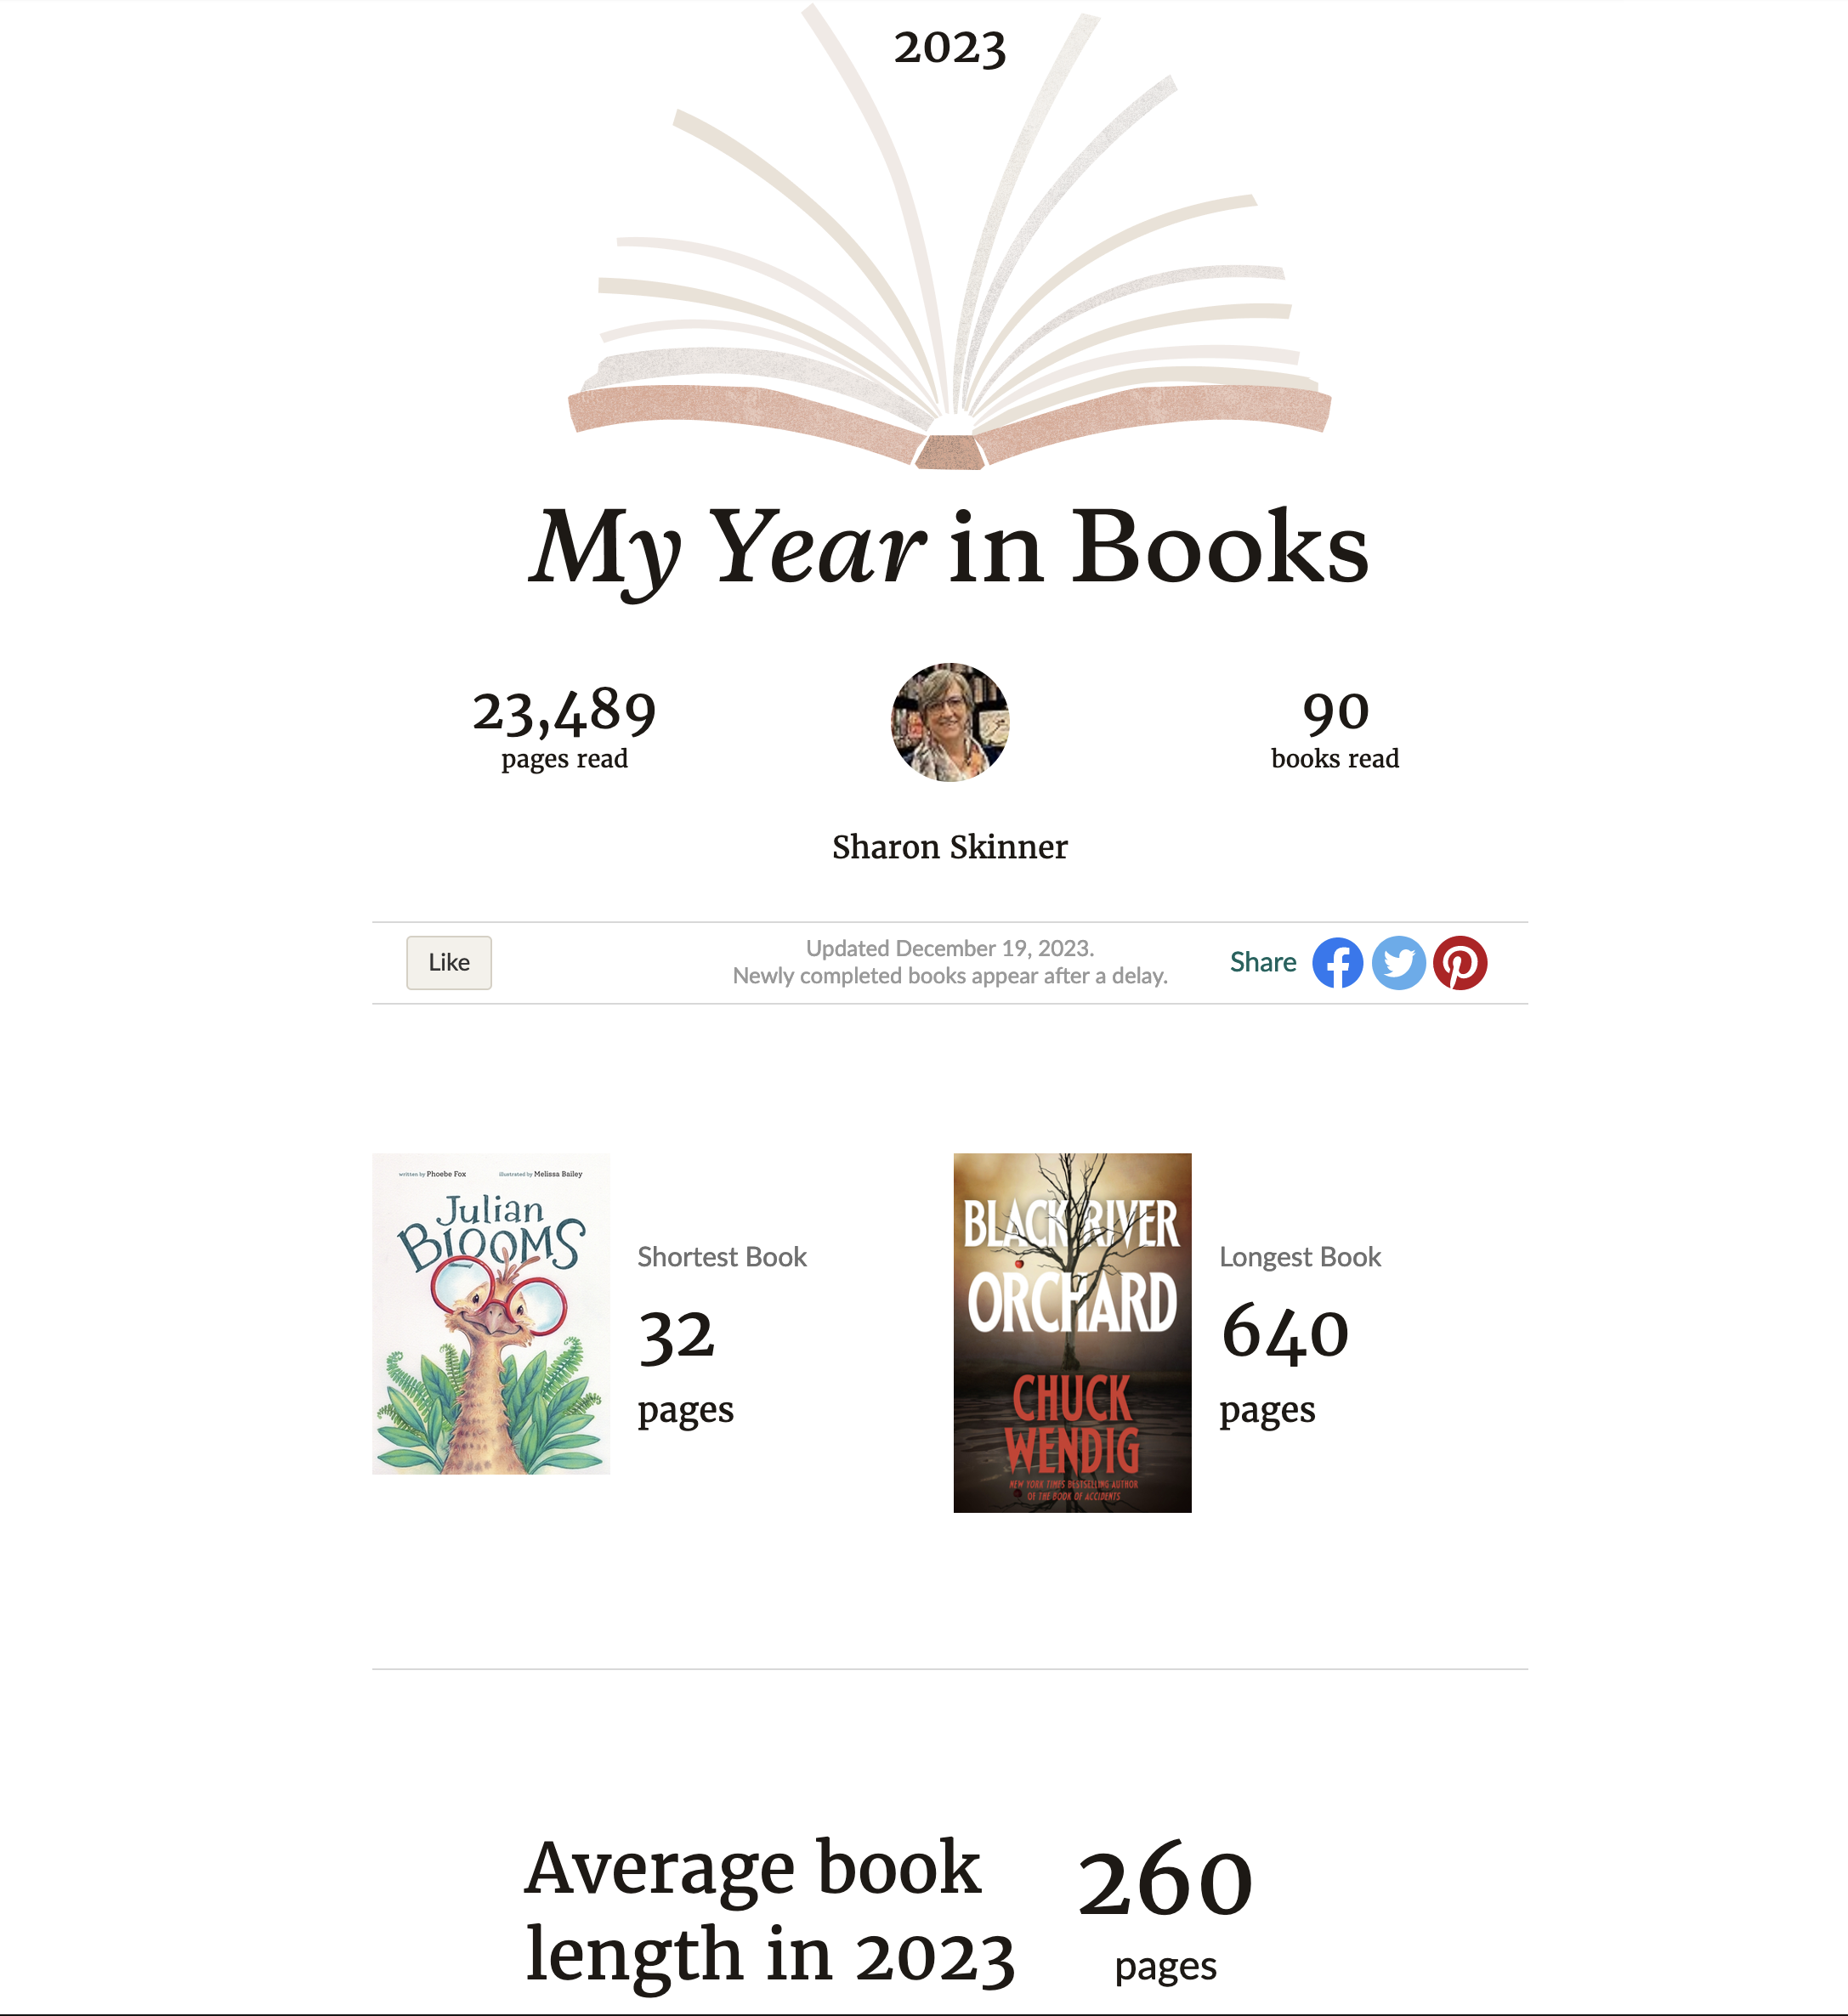 Image from Goodreads showing Sharon's 2023 Book stats summary, including shortest book (32 pages) and longest book (640 pages).